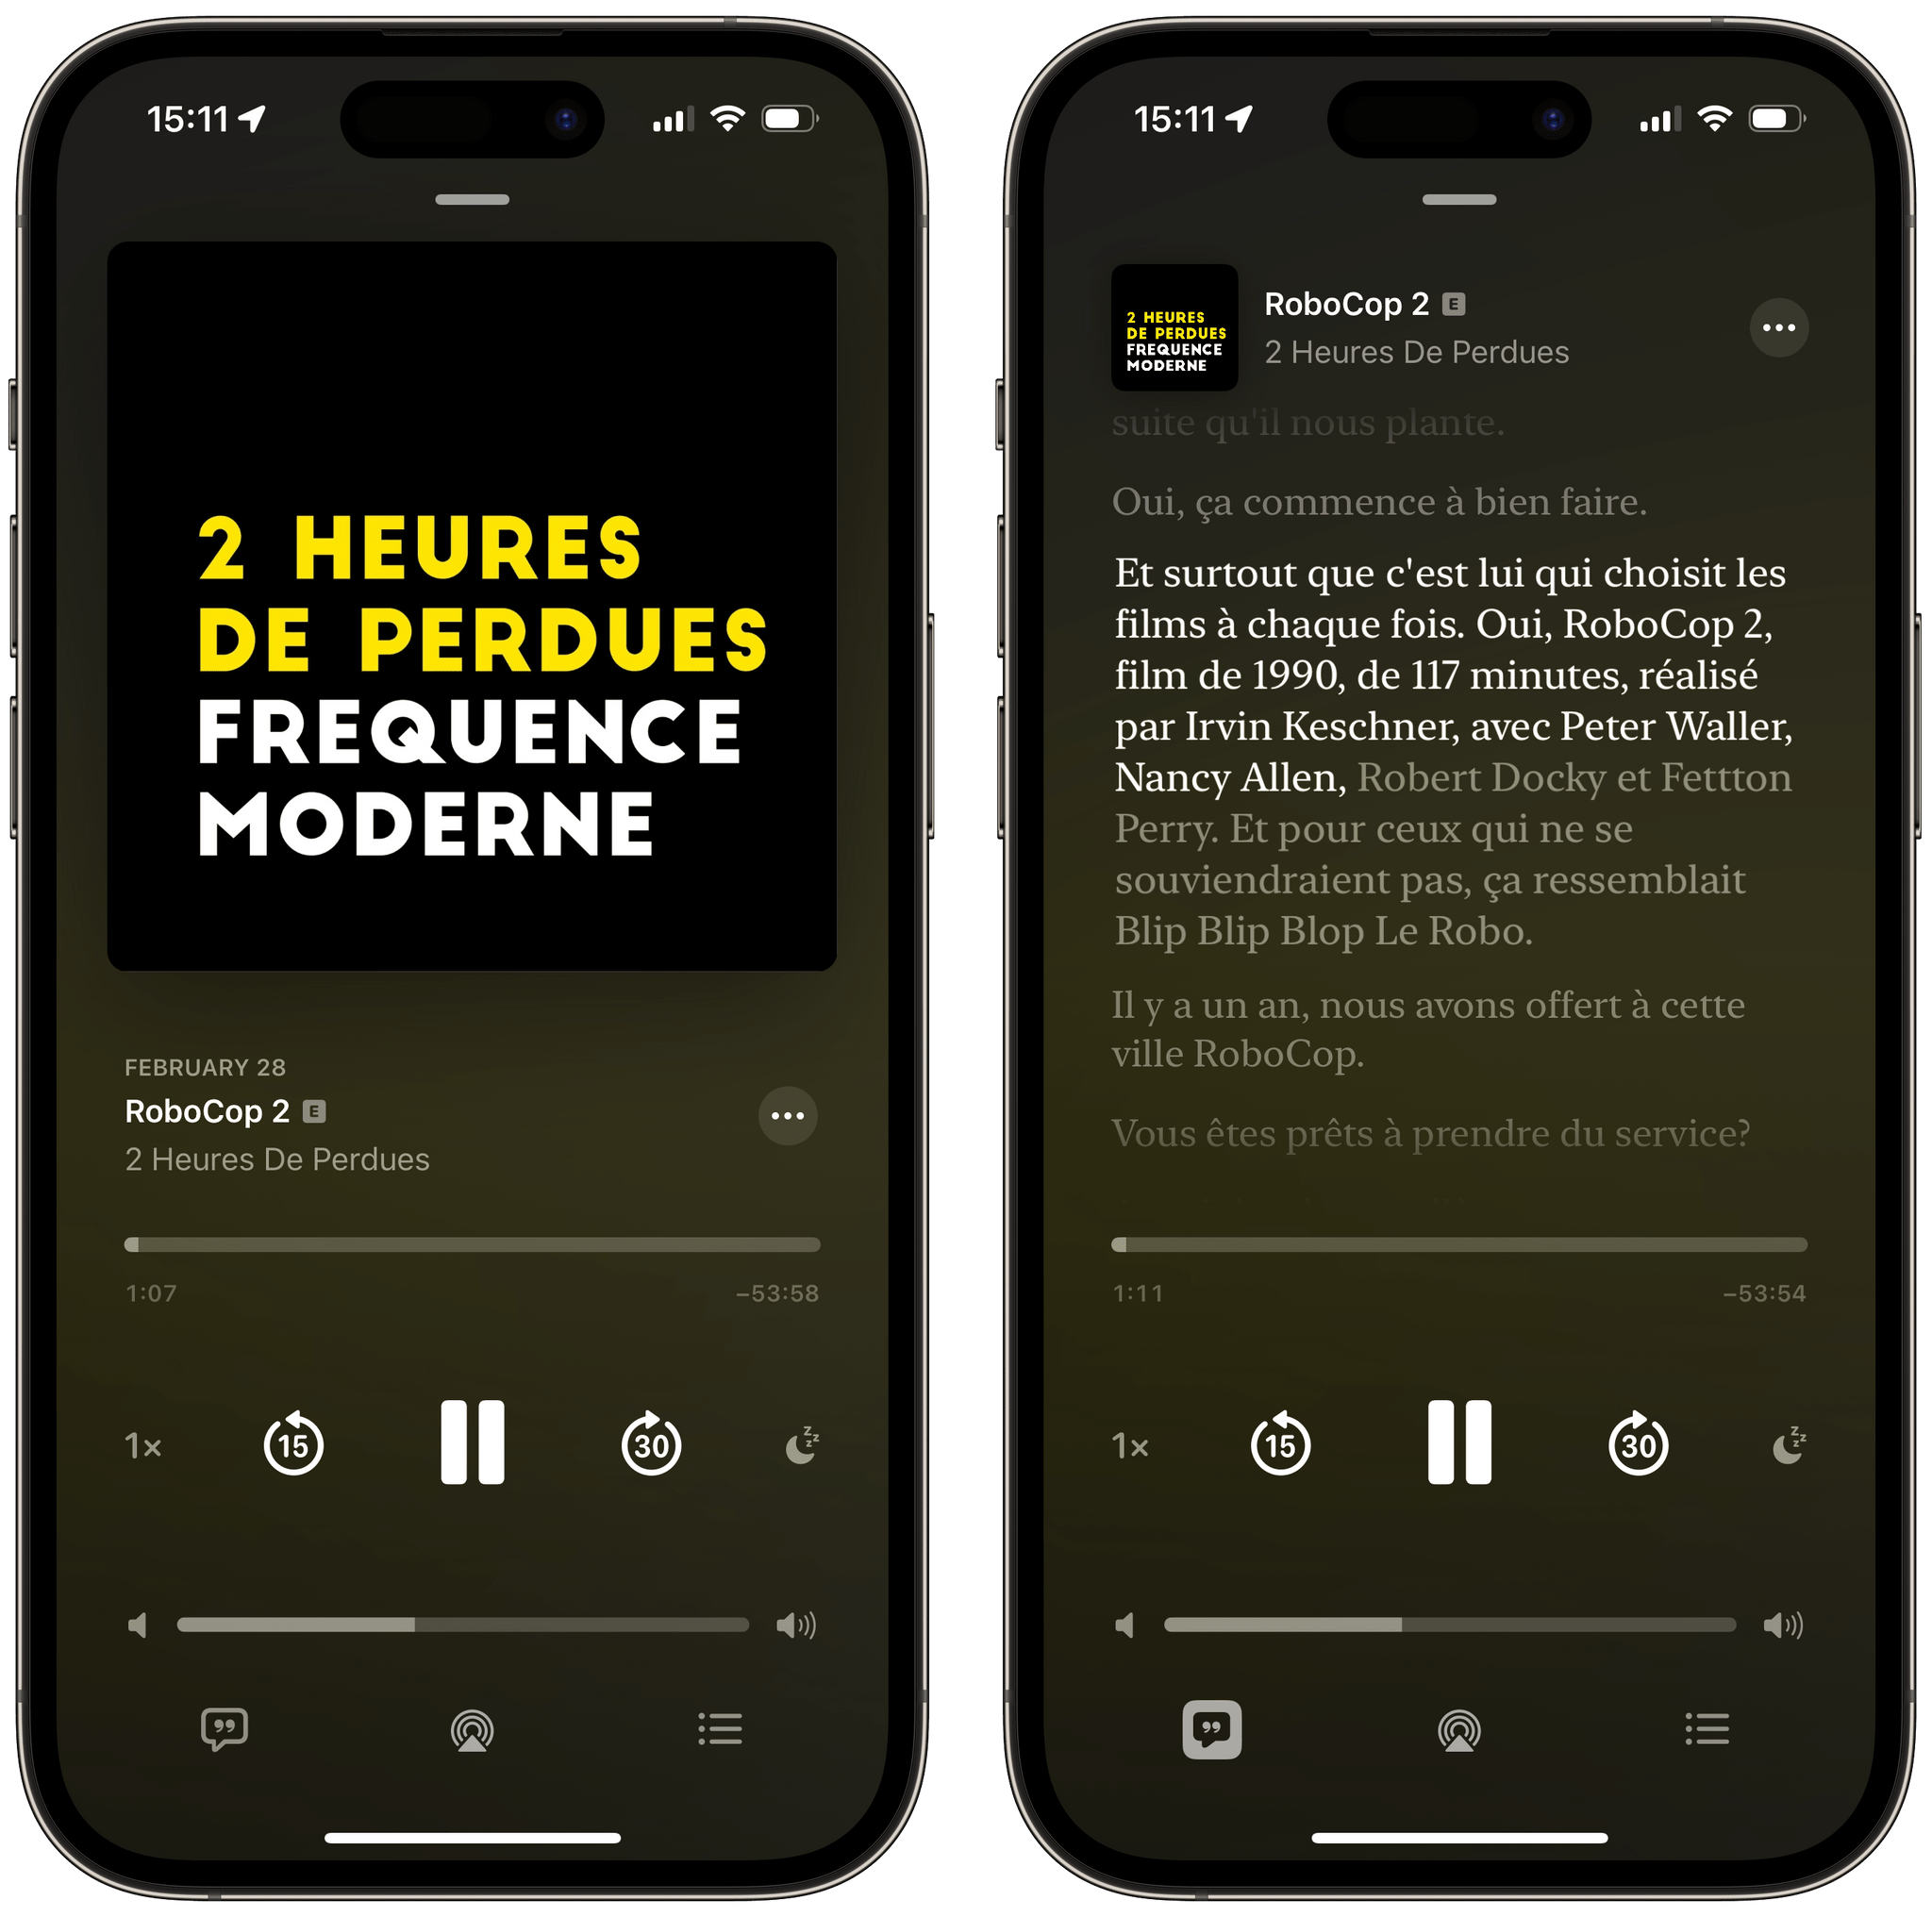 Many of my favorite French-speaking podcasts are already supported by Apple's automatic transcriptions.